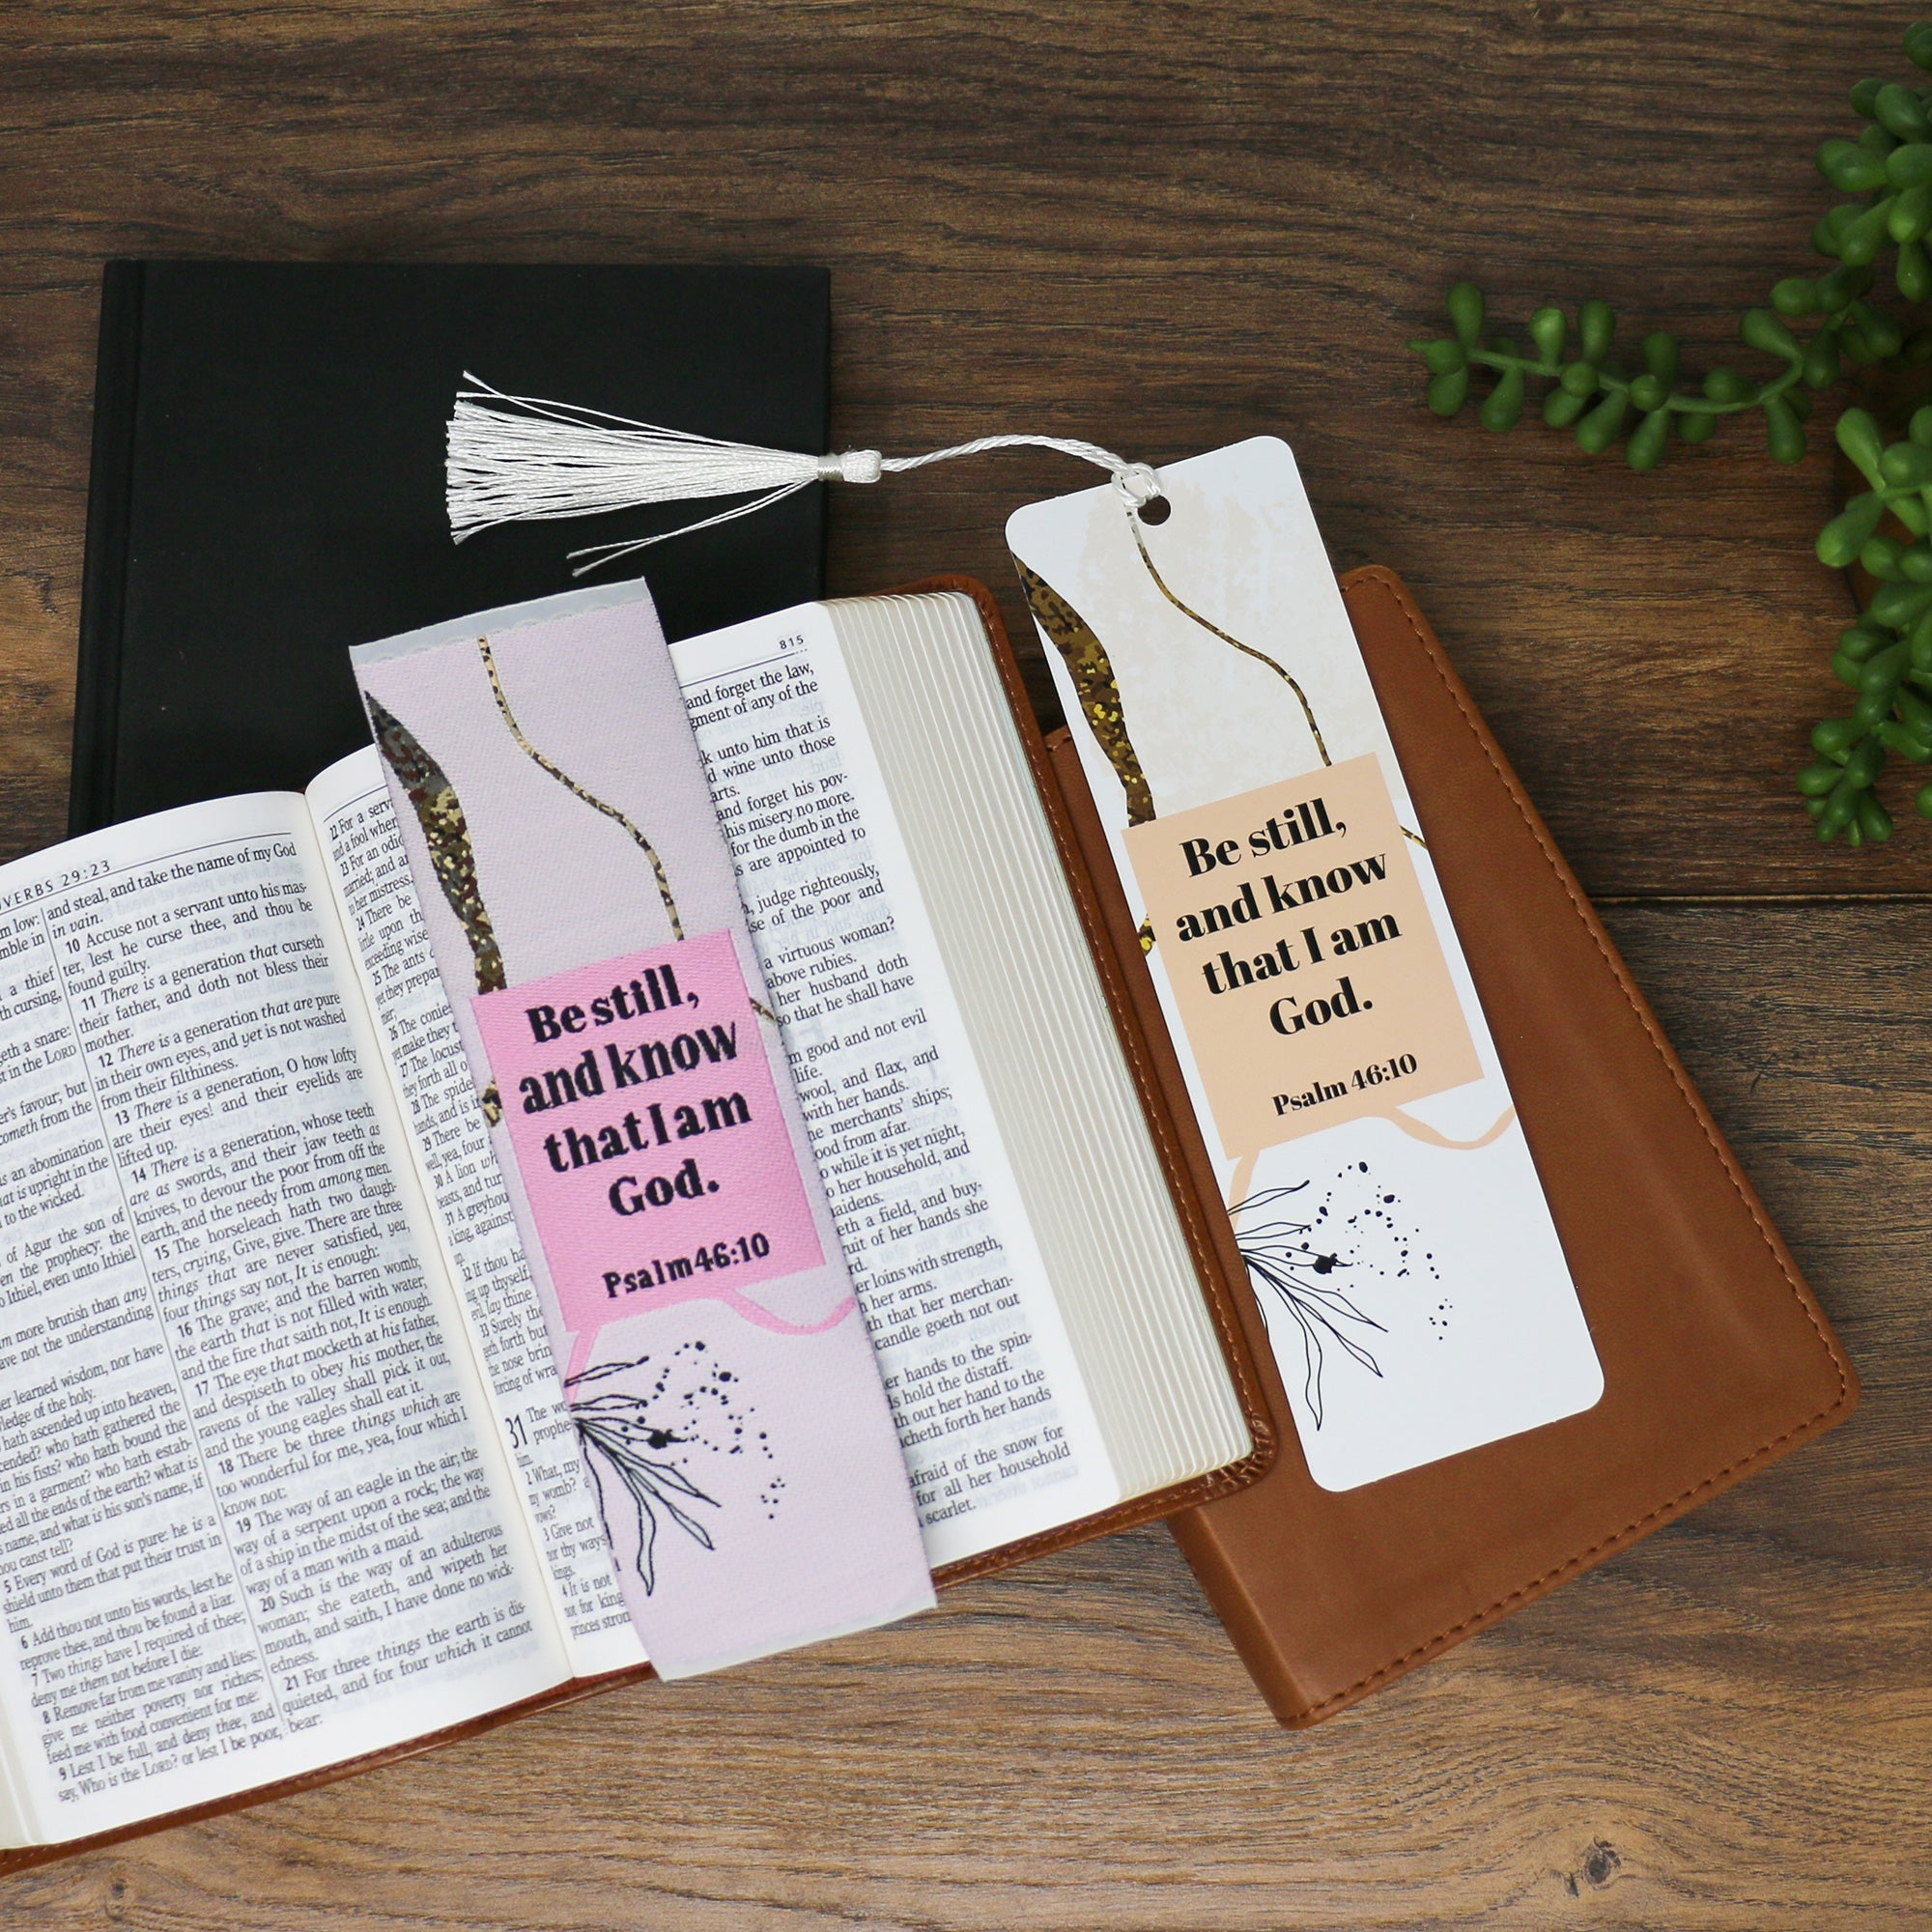 Be still and know that I am God - Psalm 46:10 Woven and Tasseled Bookmark Set